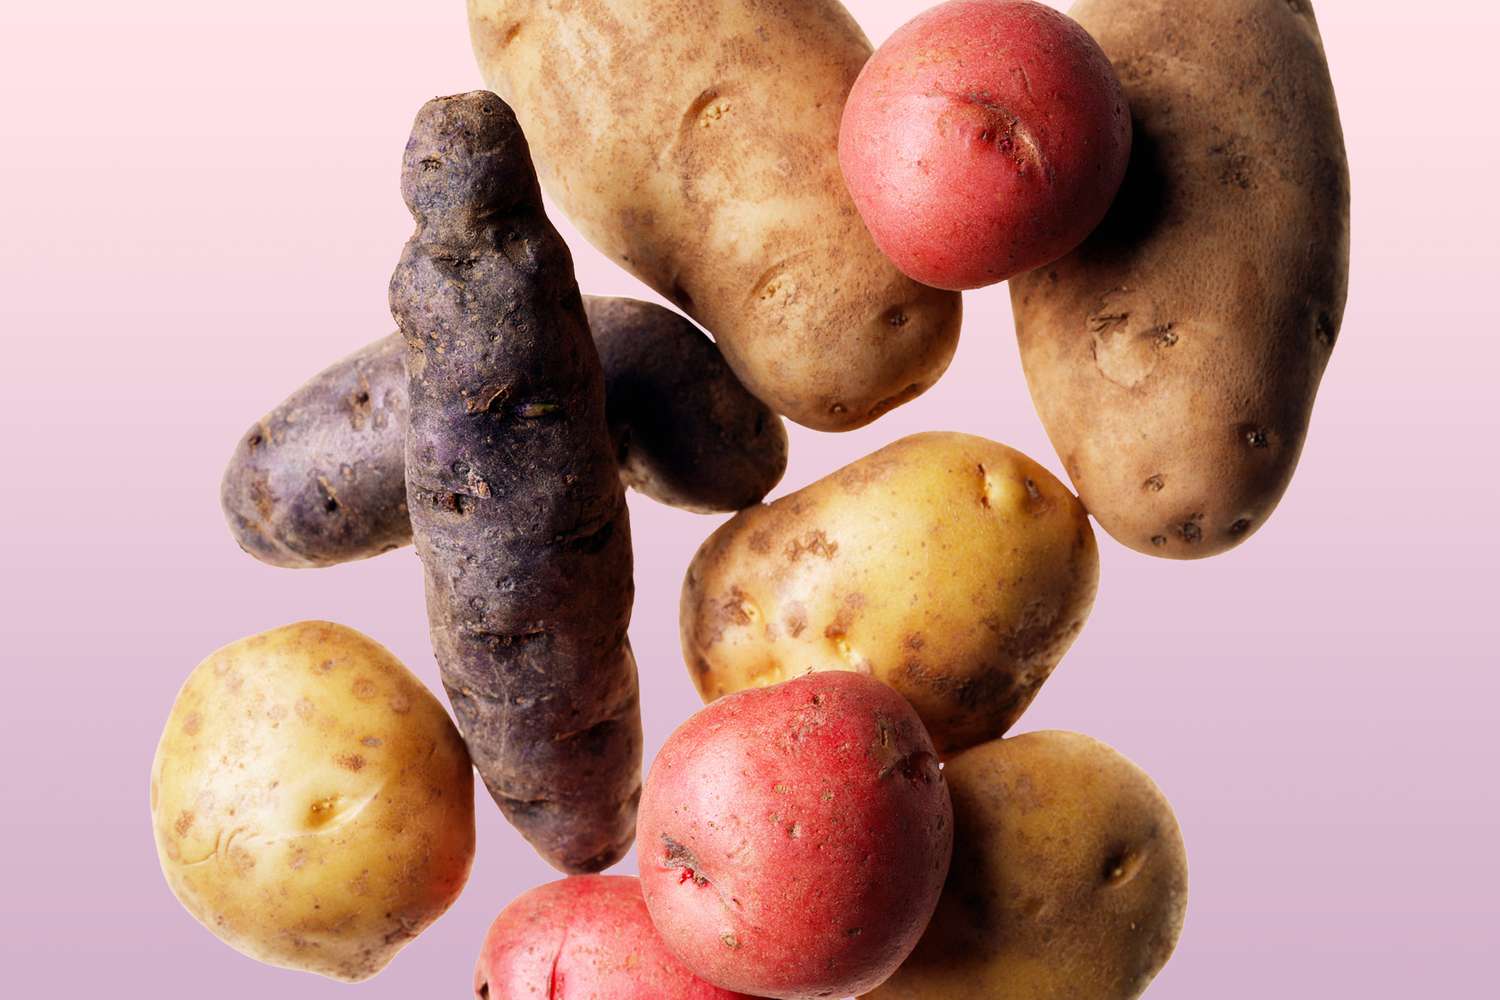 A mix of different potatoes on a designed background